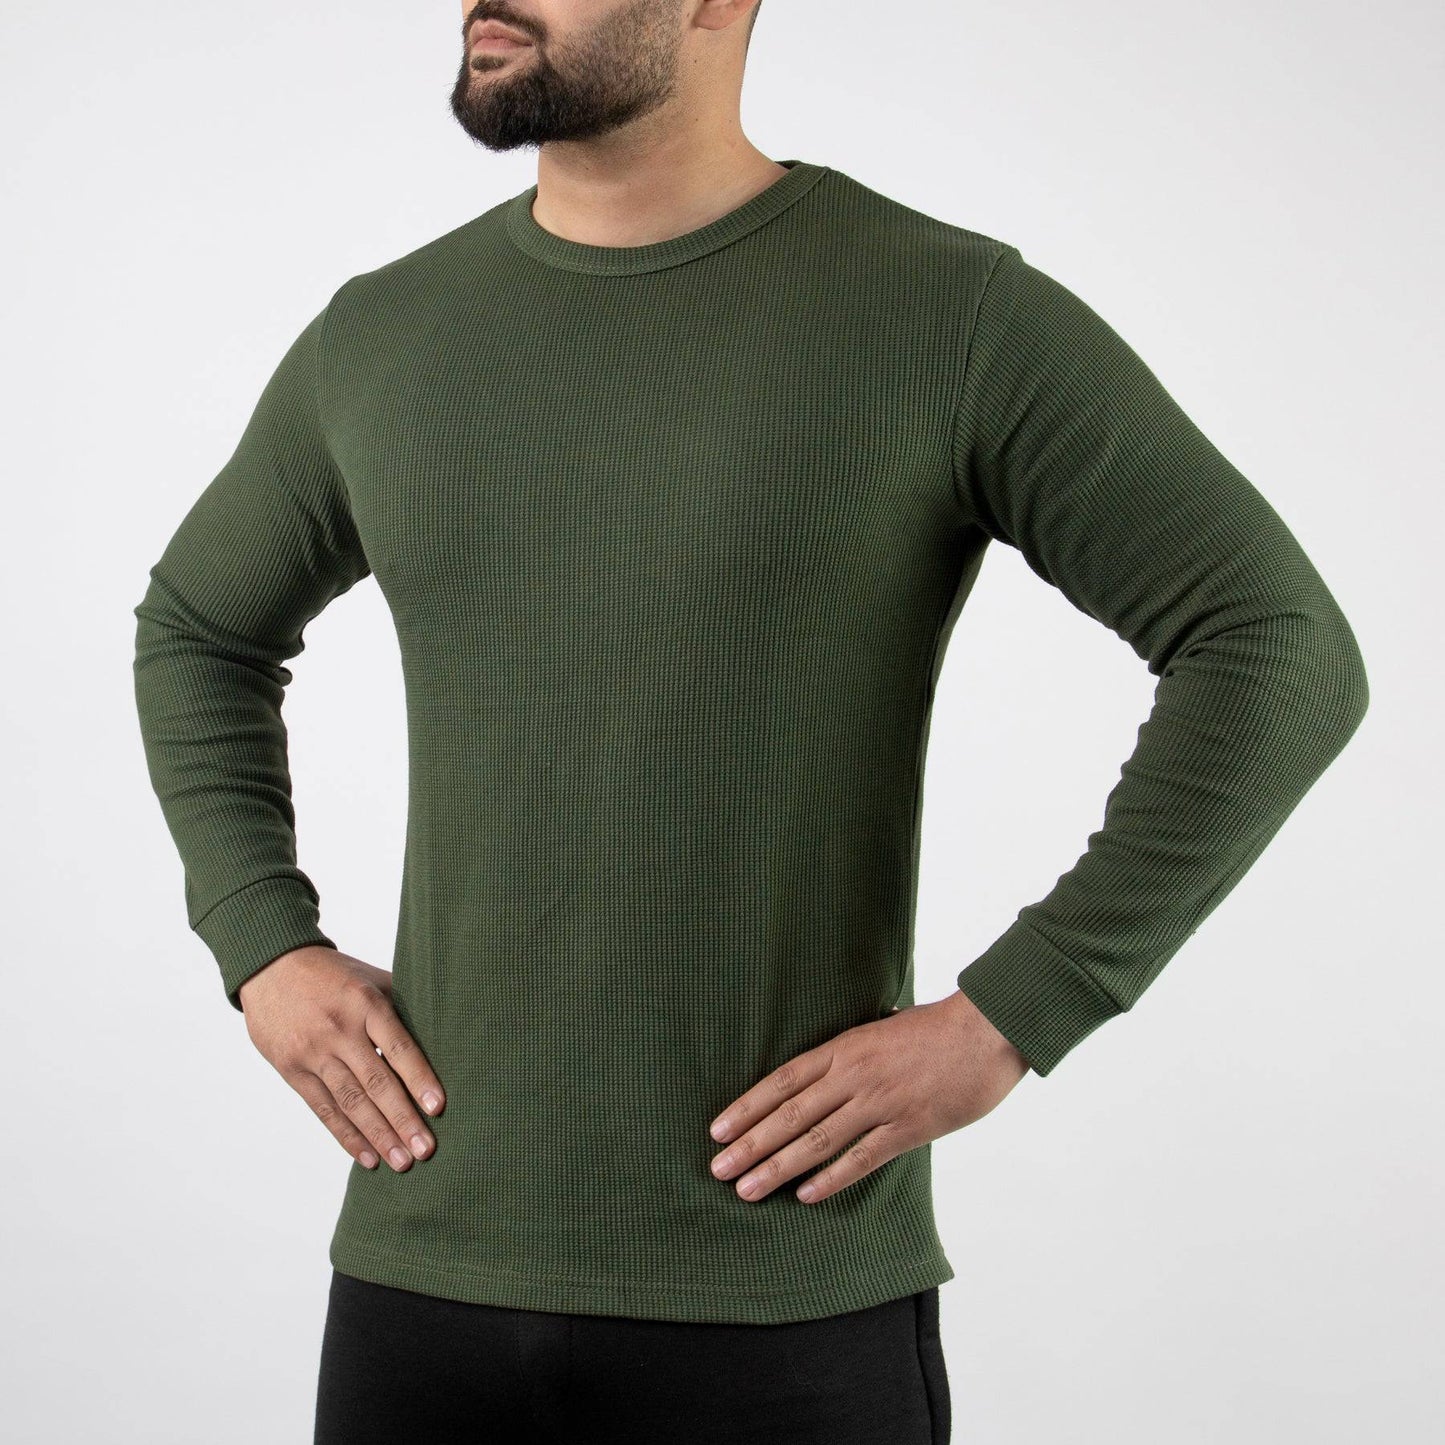 Olive Thermal Full Sleeves Waffle-Knit - Valetica Sports